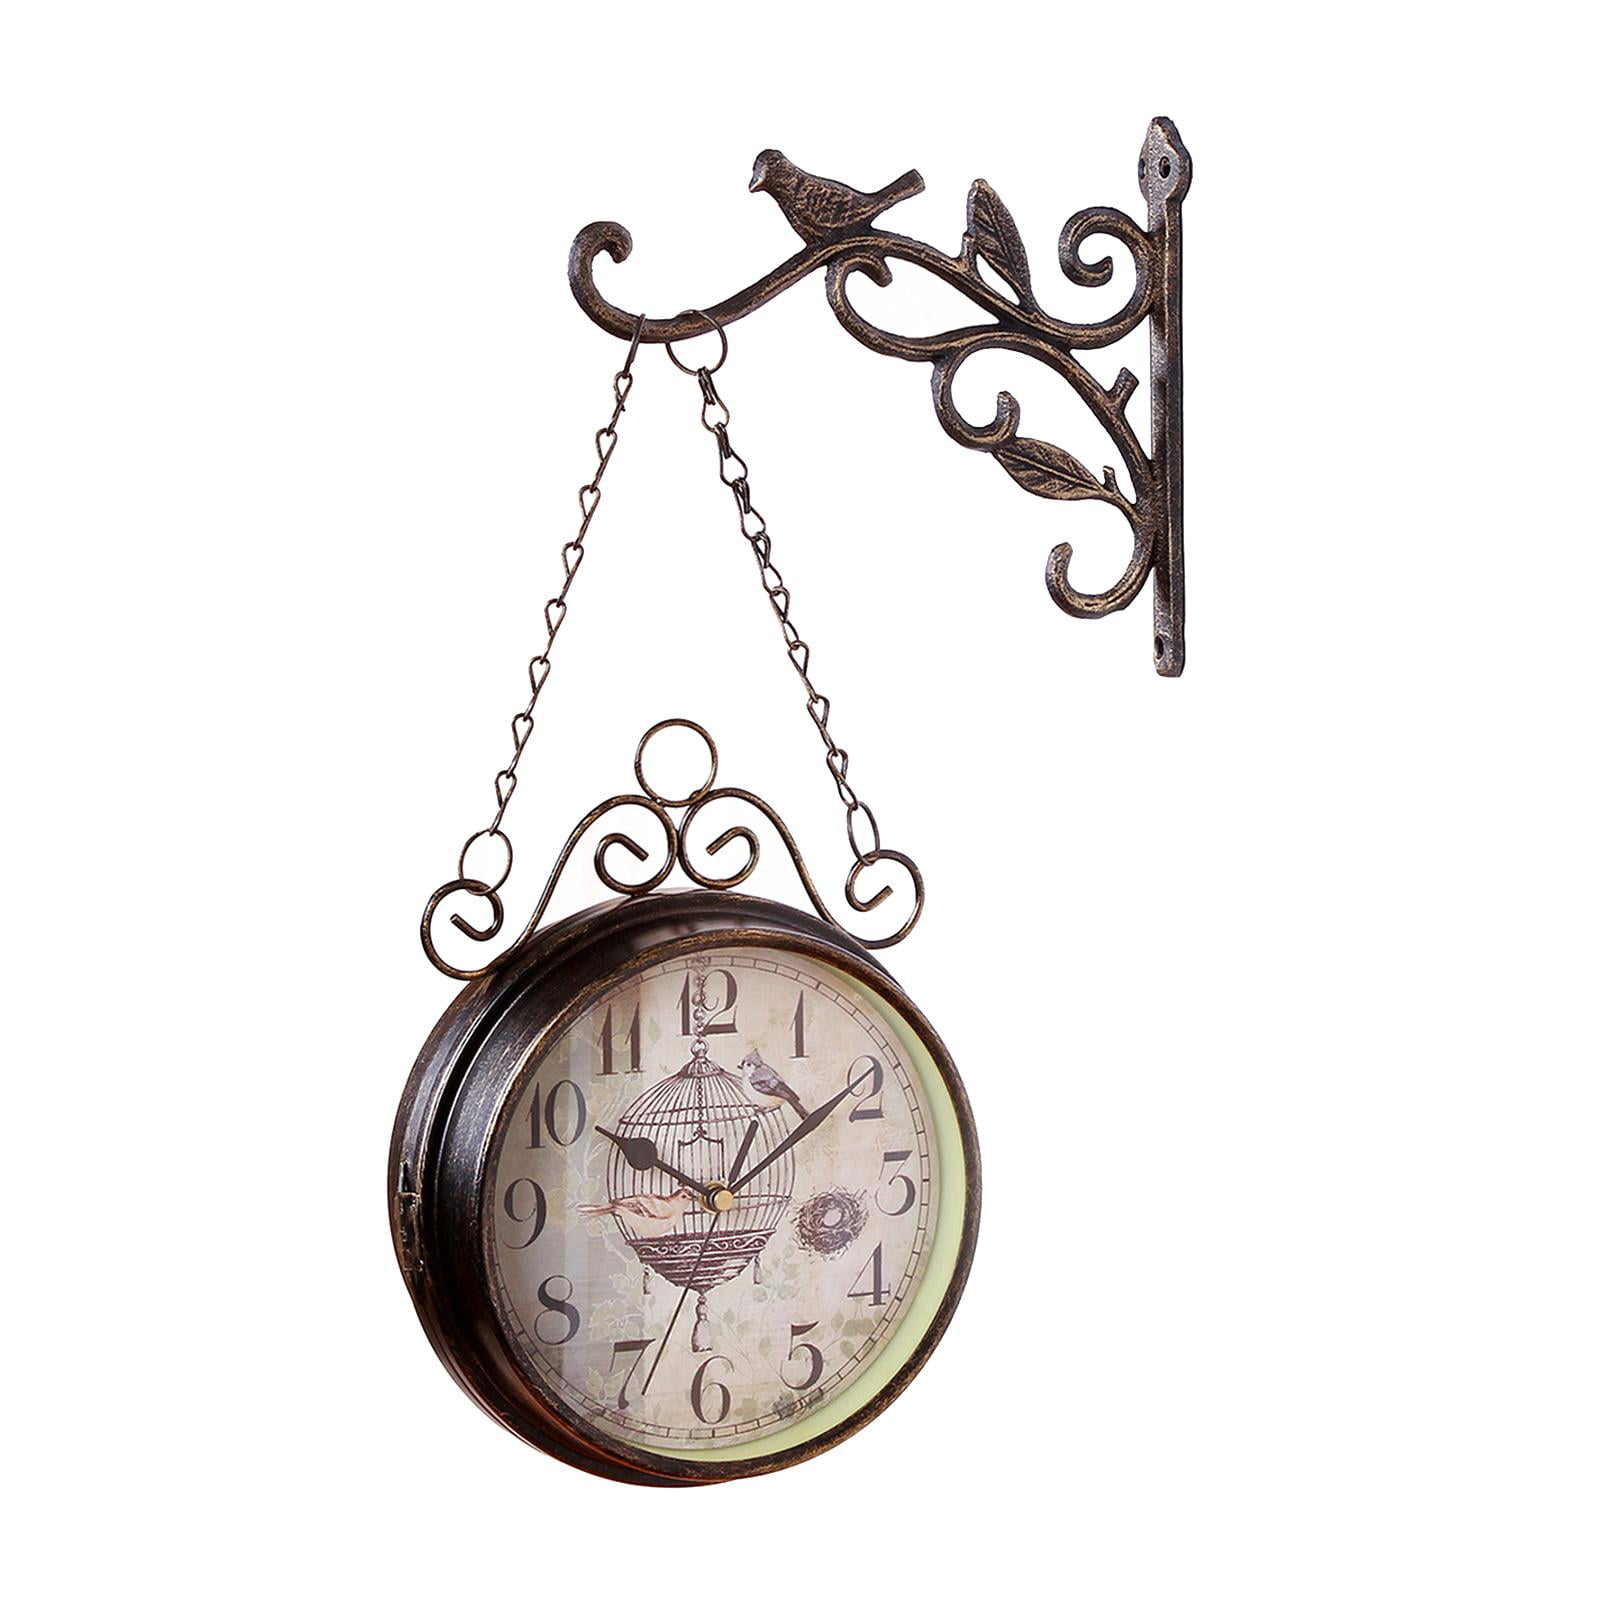 Antique Double Sided Wall Mount Station Clock Garden Vintage Retro Home Decor